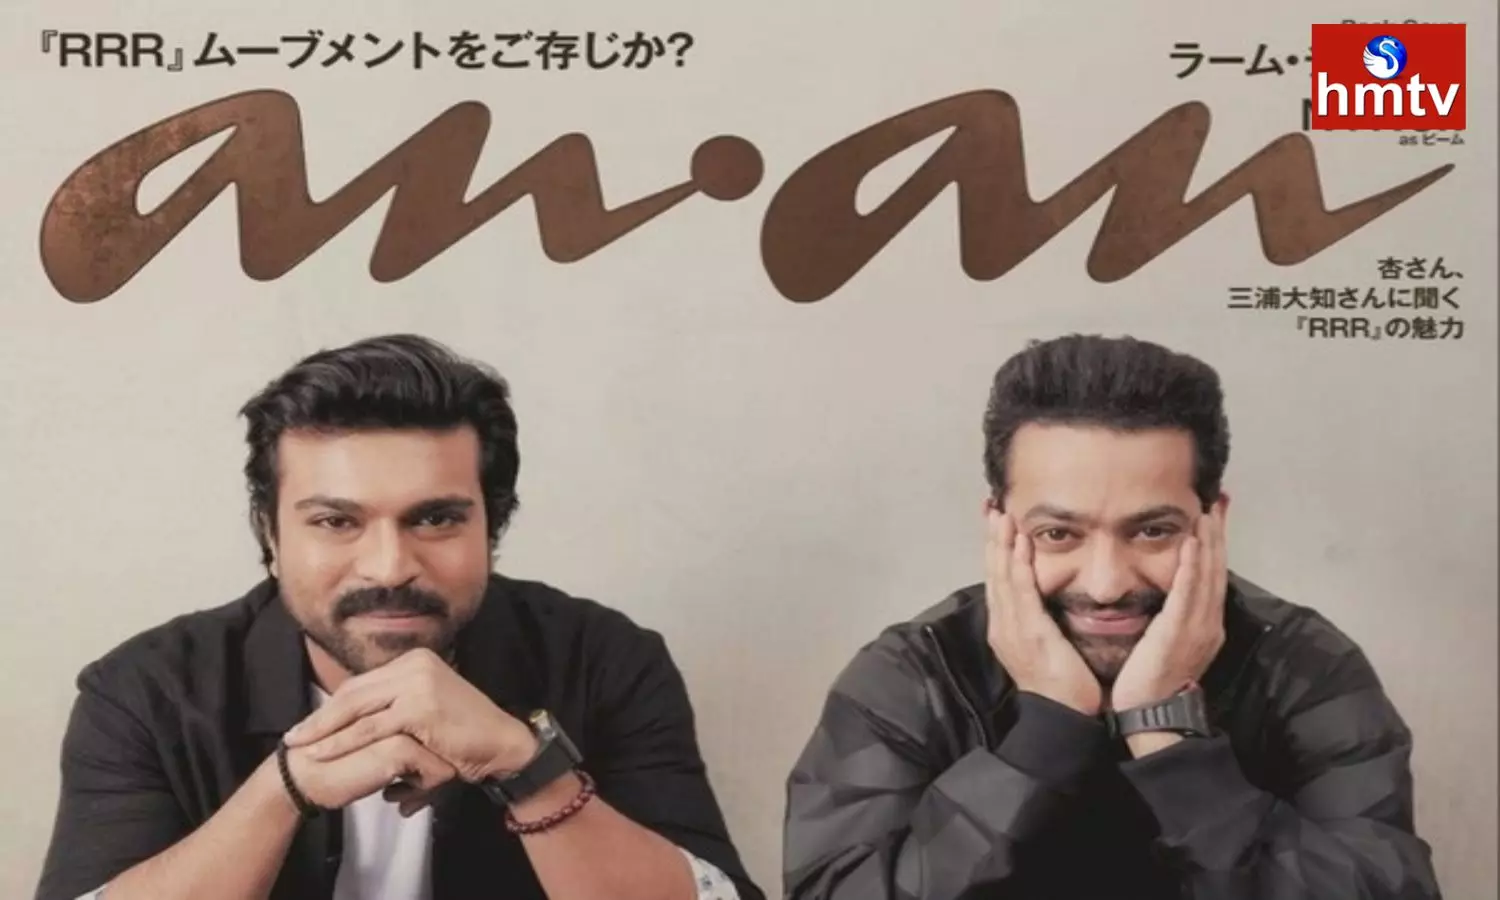 NTR And Charan On Cover Page Of Japanese Magazine